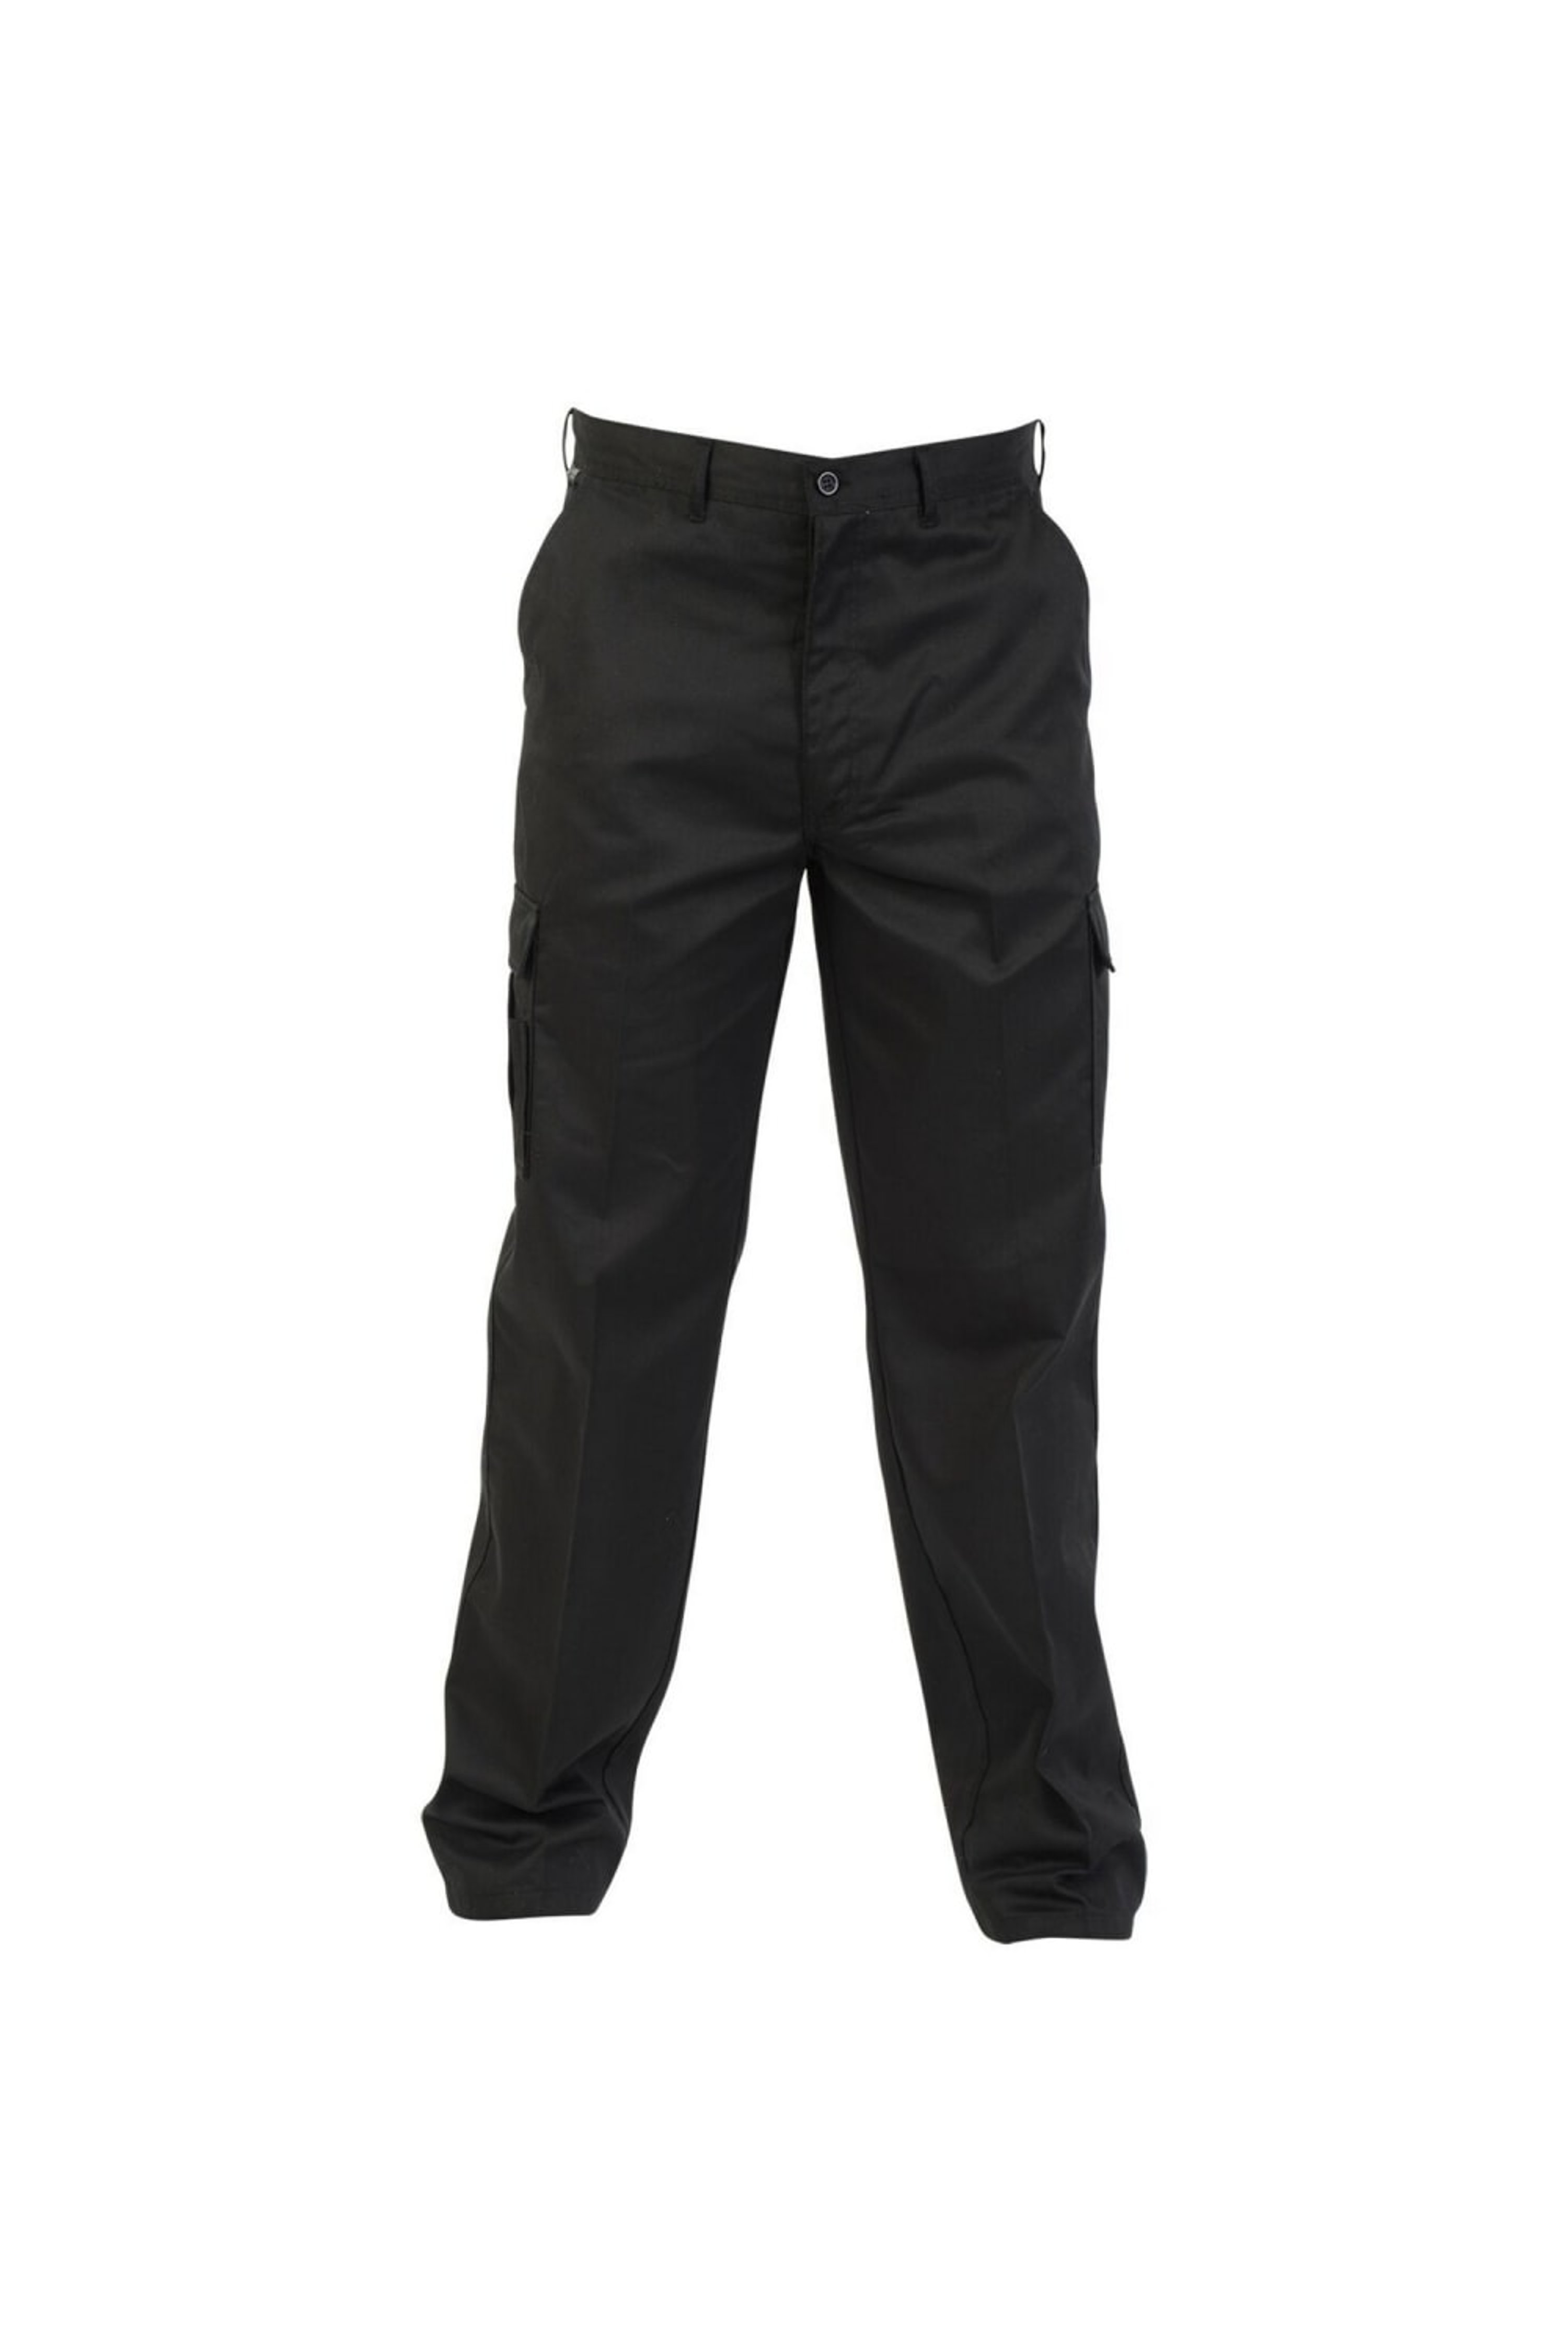 ABSOLUTE APPAREL ABSOLUTE APPAREL MENS COMBAT WORKWEAR TROUSER